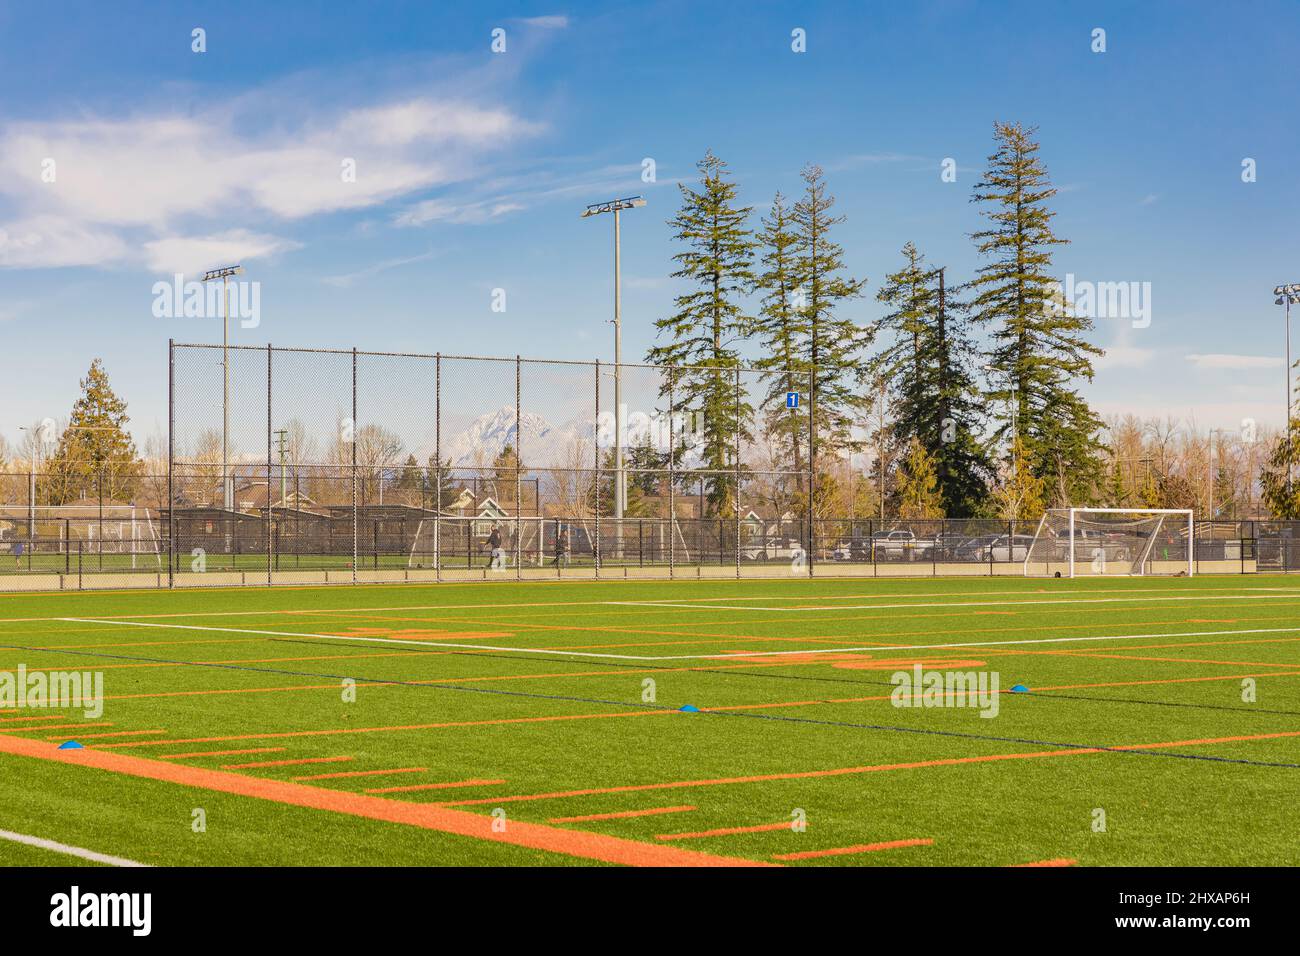 American football and soccer field and grass in sunny spring day. Street view, selective focus Stock Photo